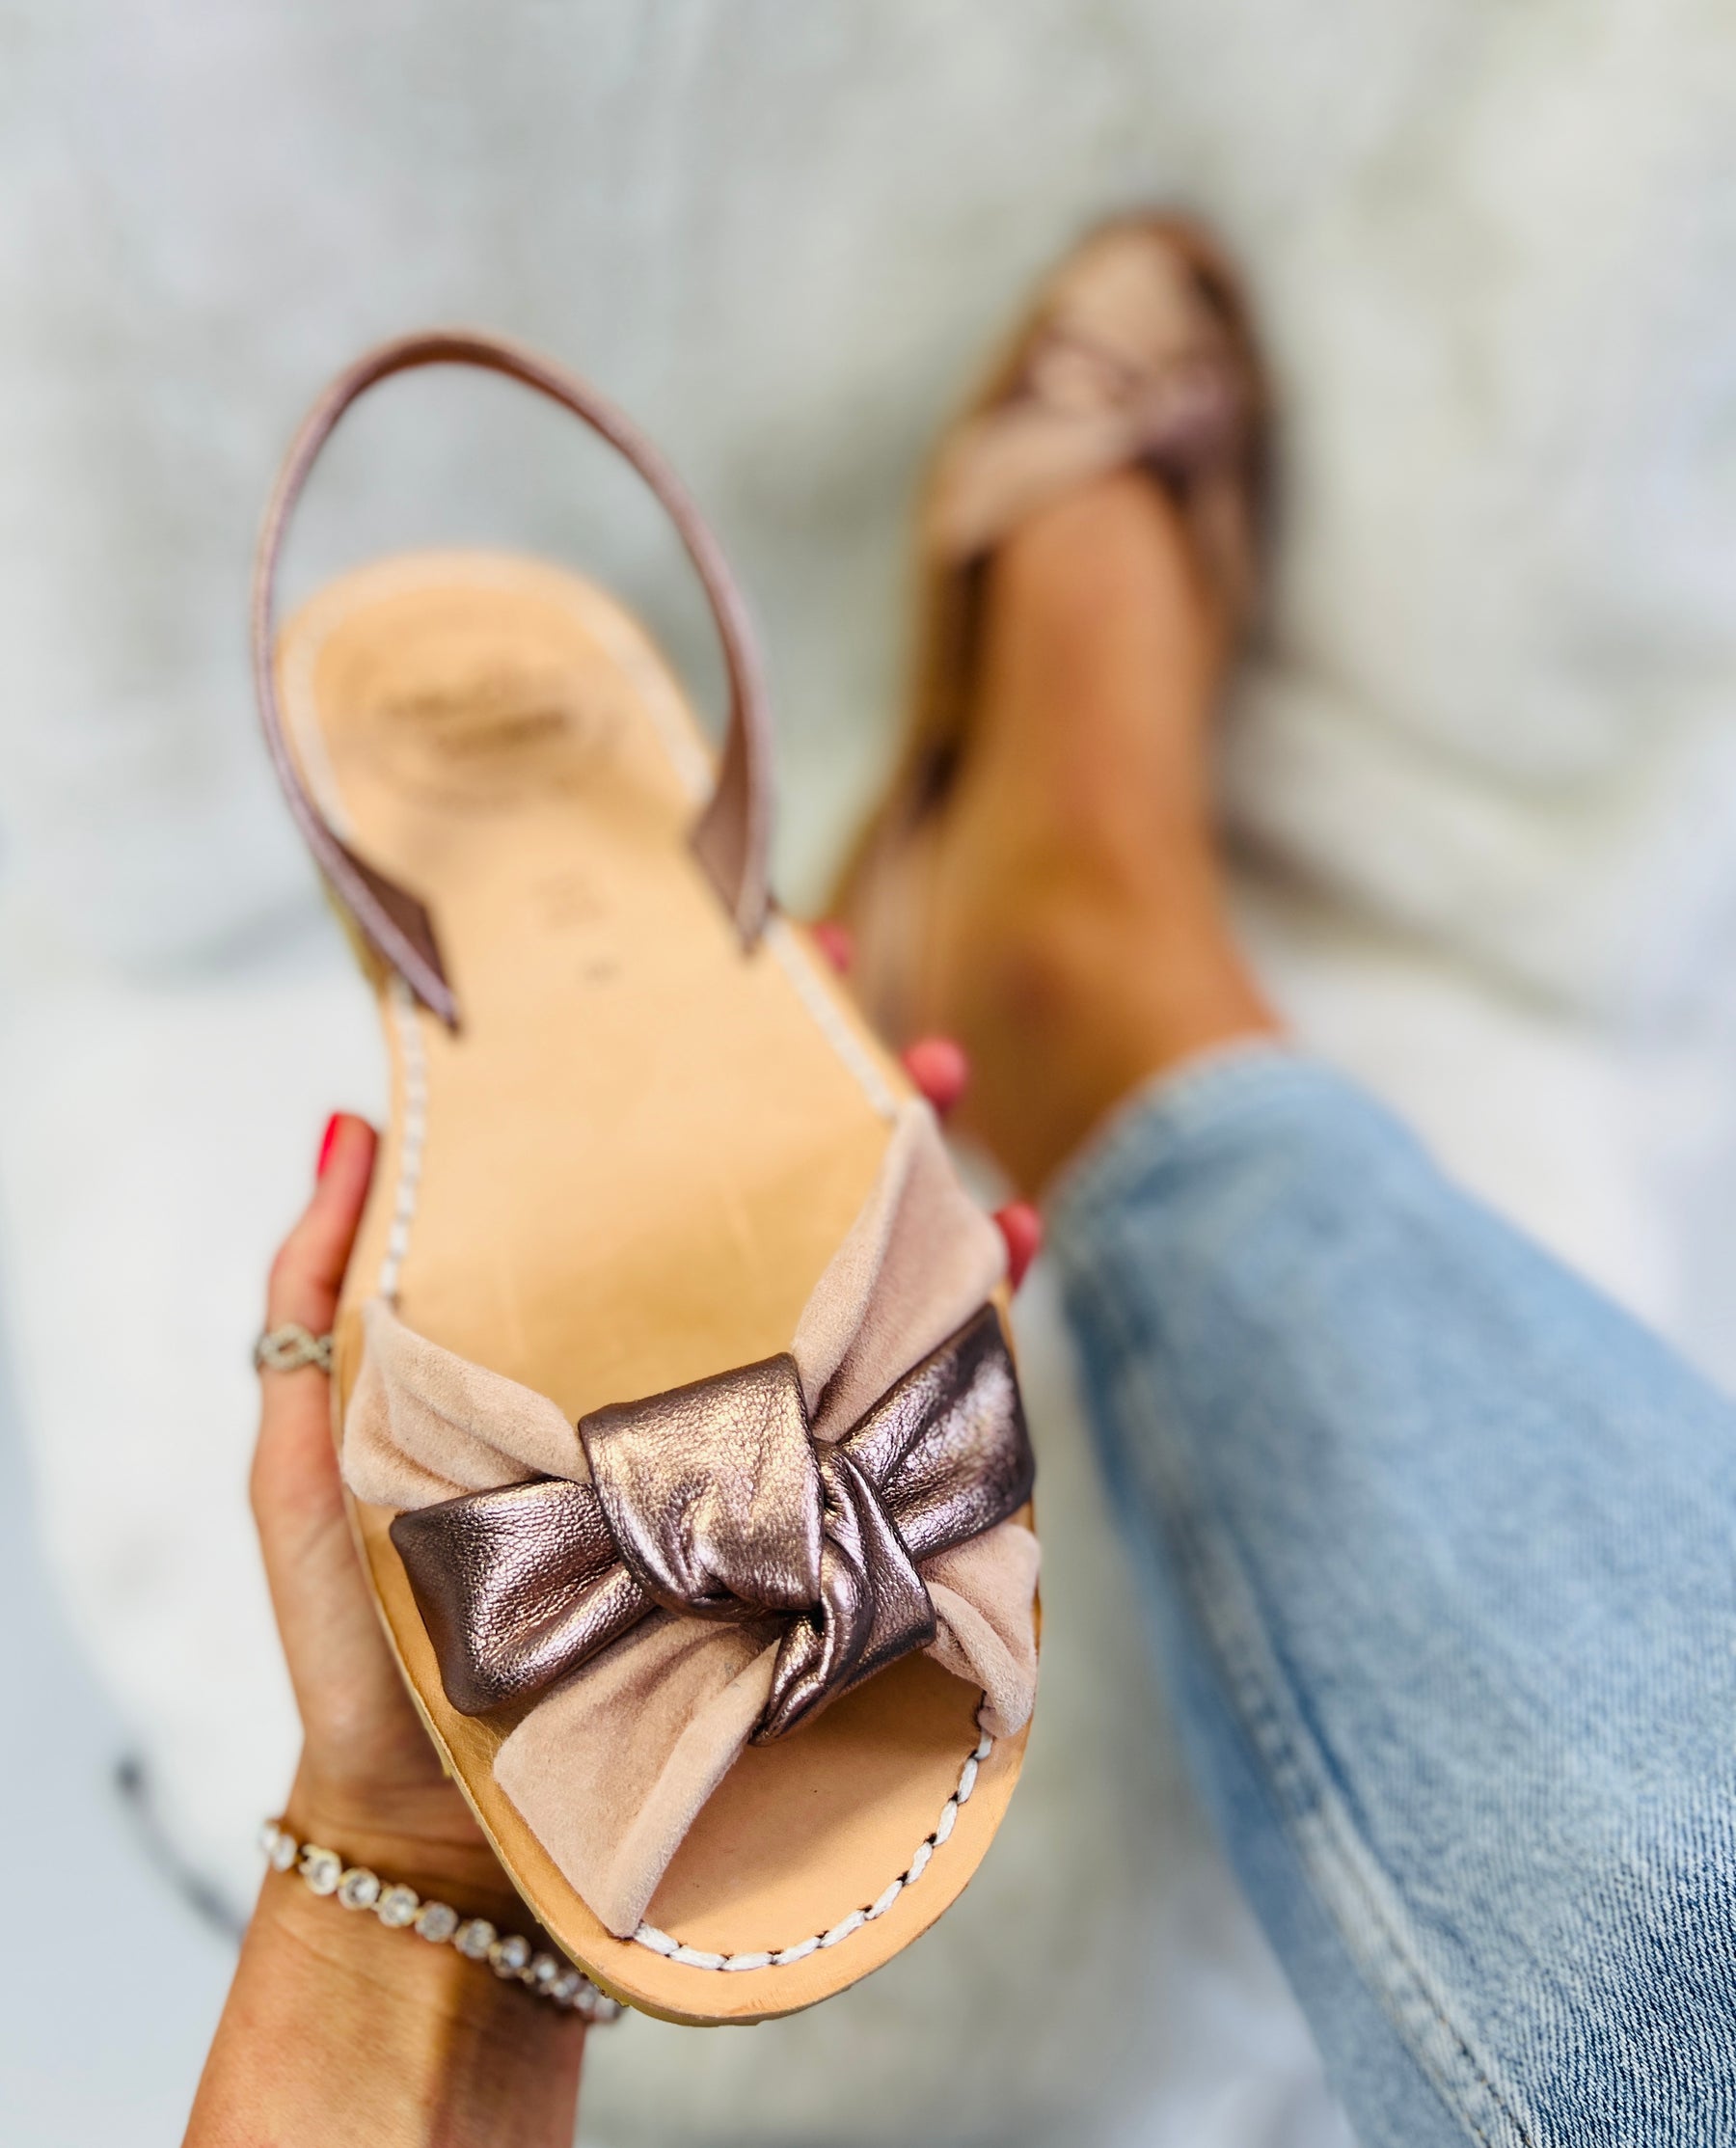 pale pink suede and metallic leather knotted peeptoe avarca sandals with flexible rubber sole and slingback.